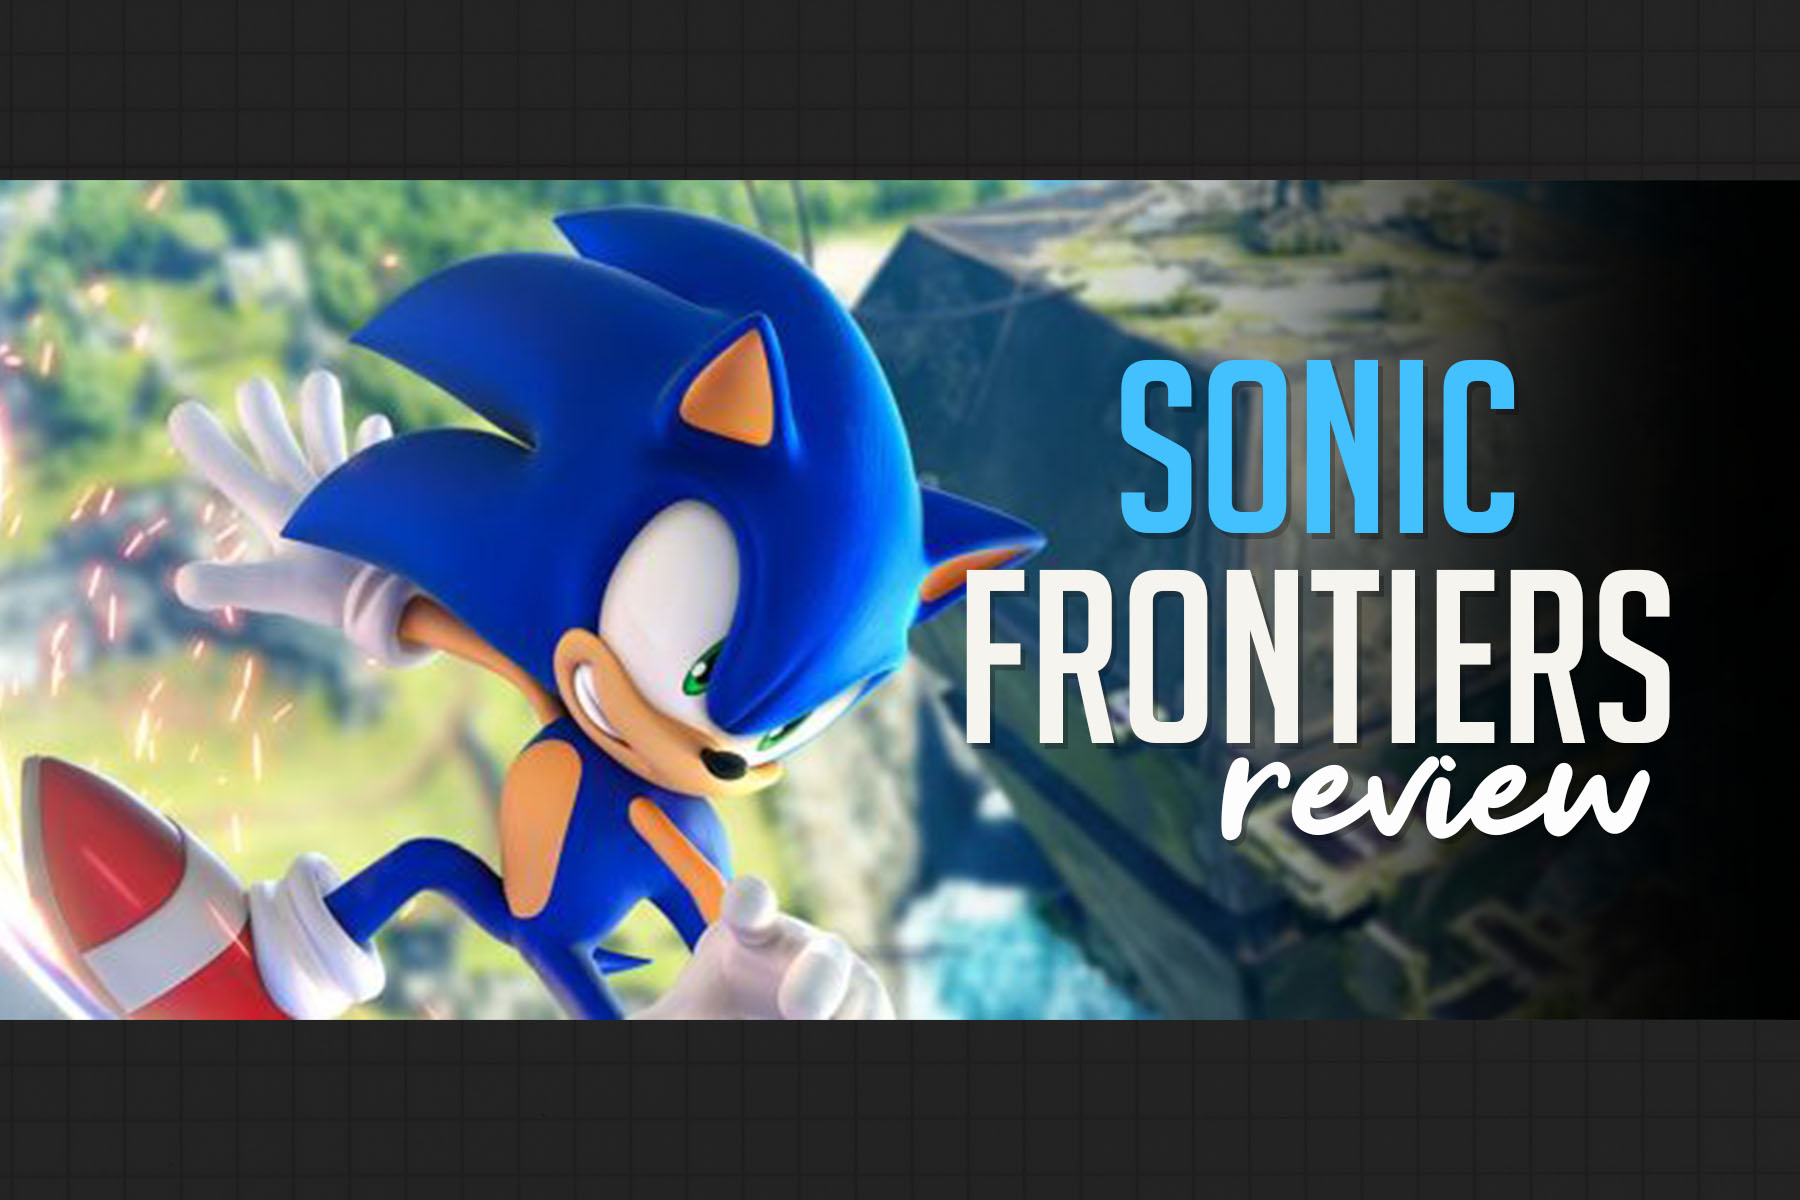 Review  Sonic Frontiers